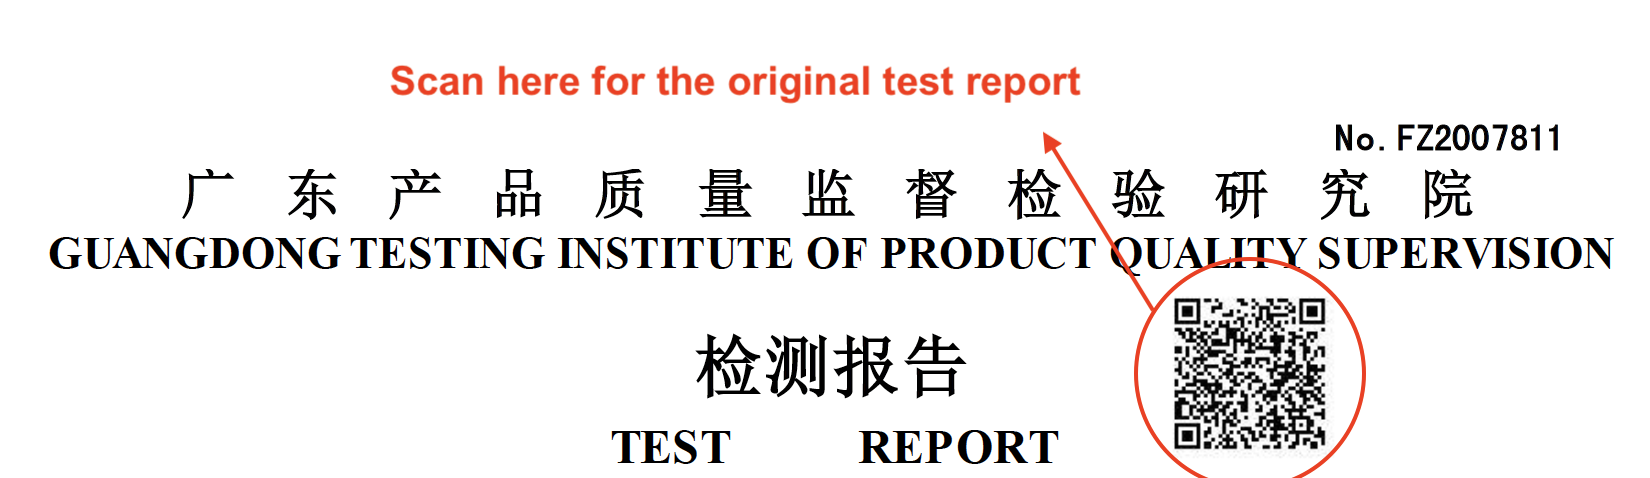 Test Report - LUBAN -Check Authenticity